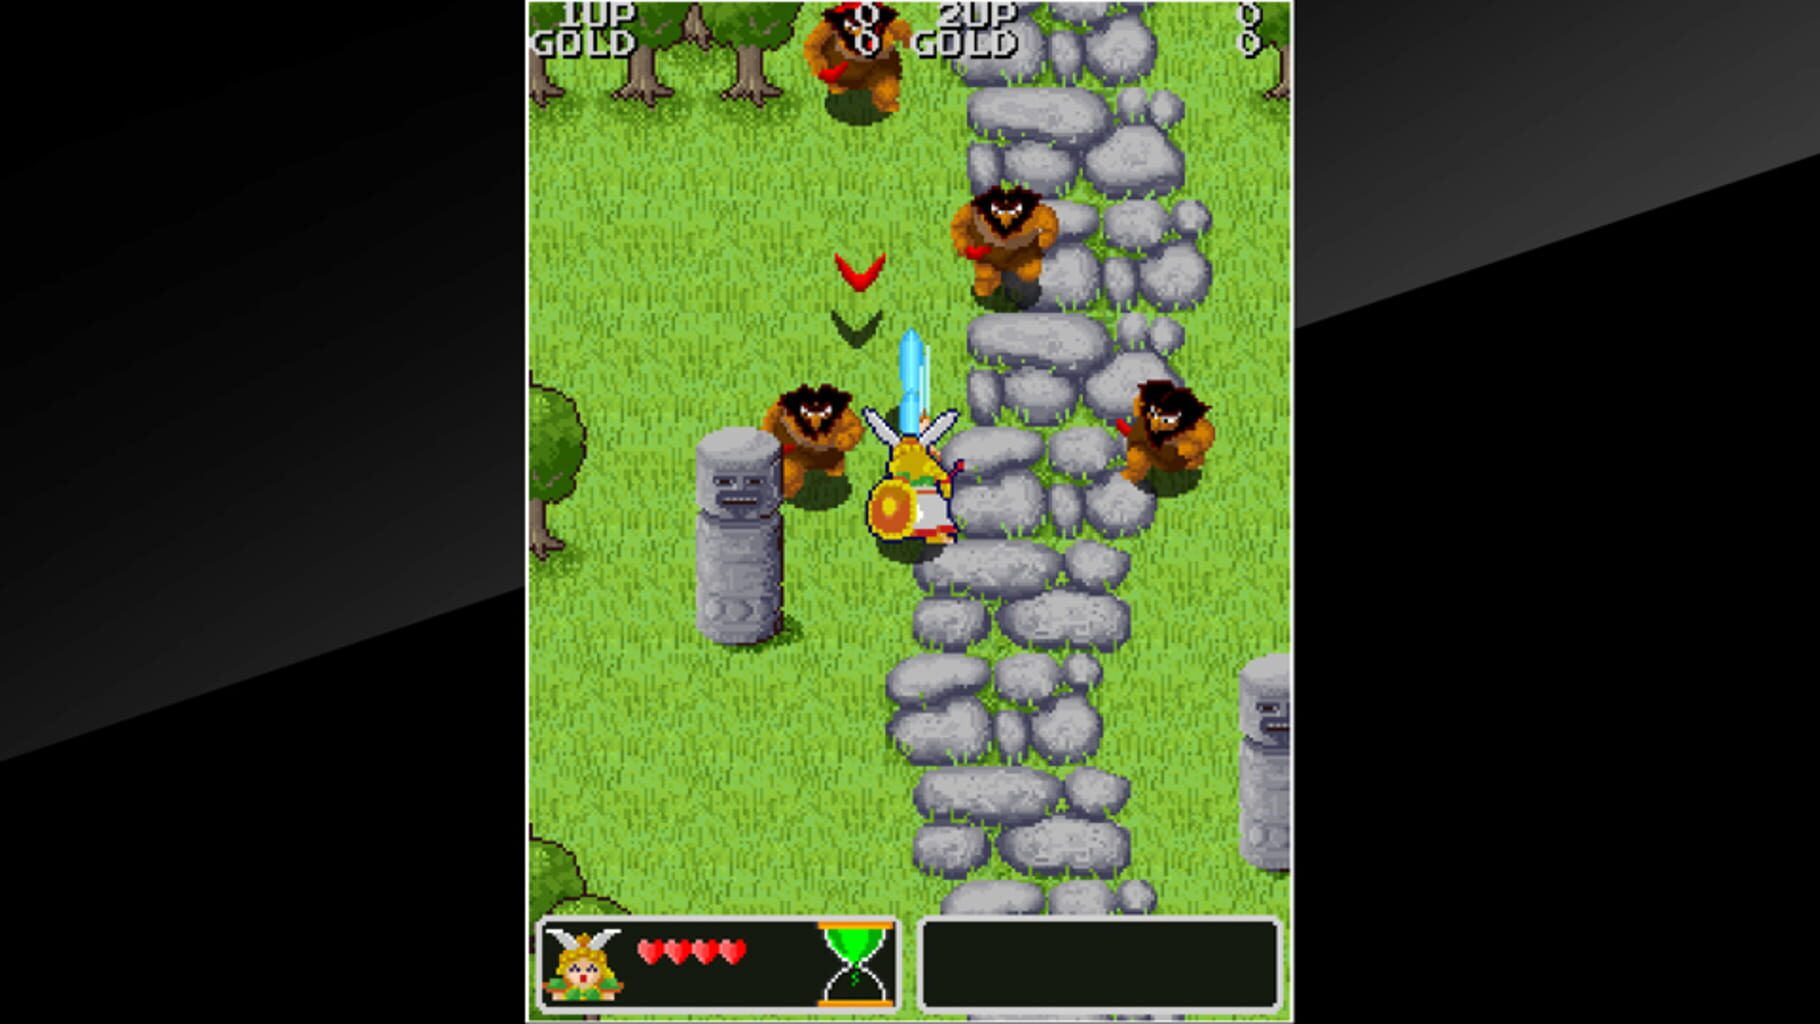 Arcade Archives: The Legend Of Valkyrie screenshot